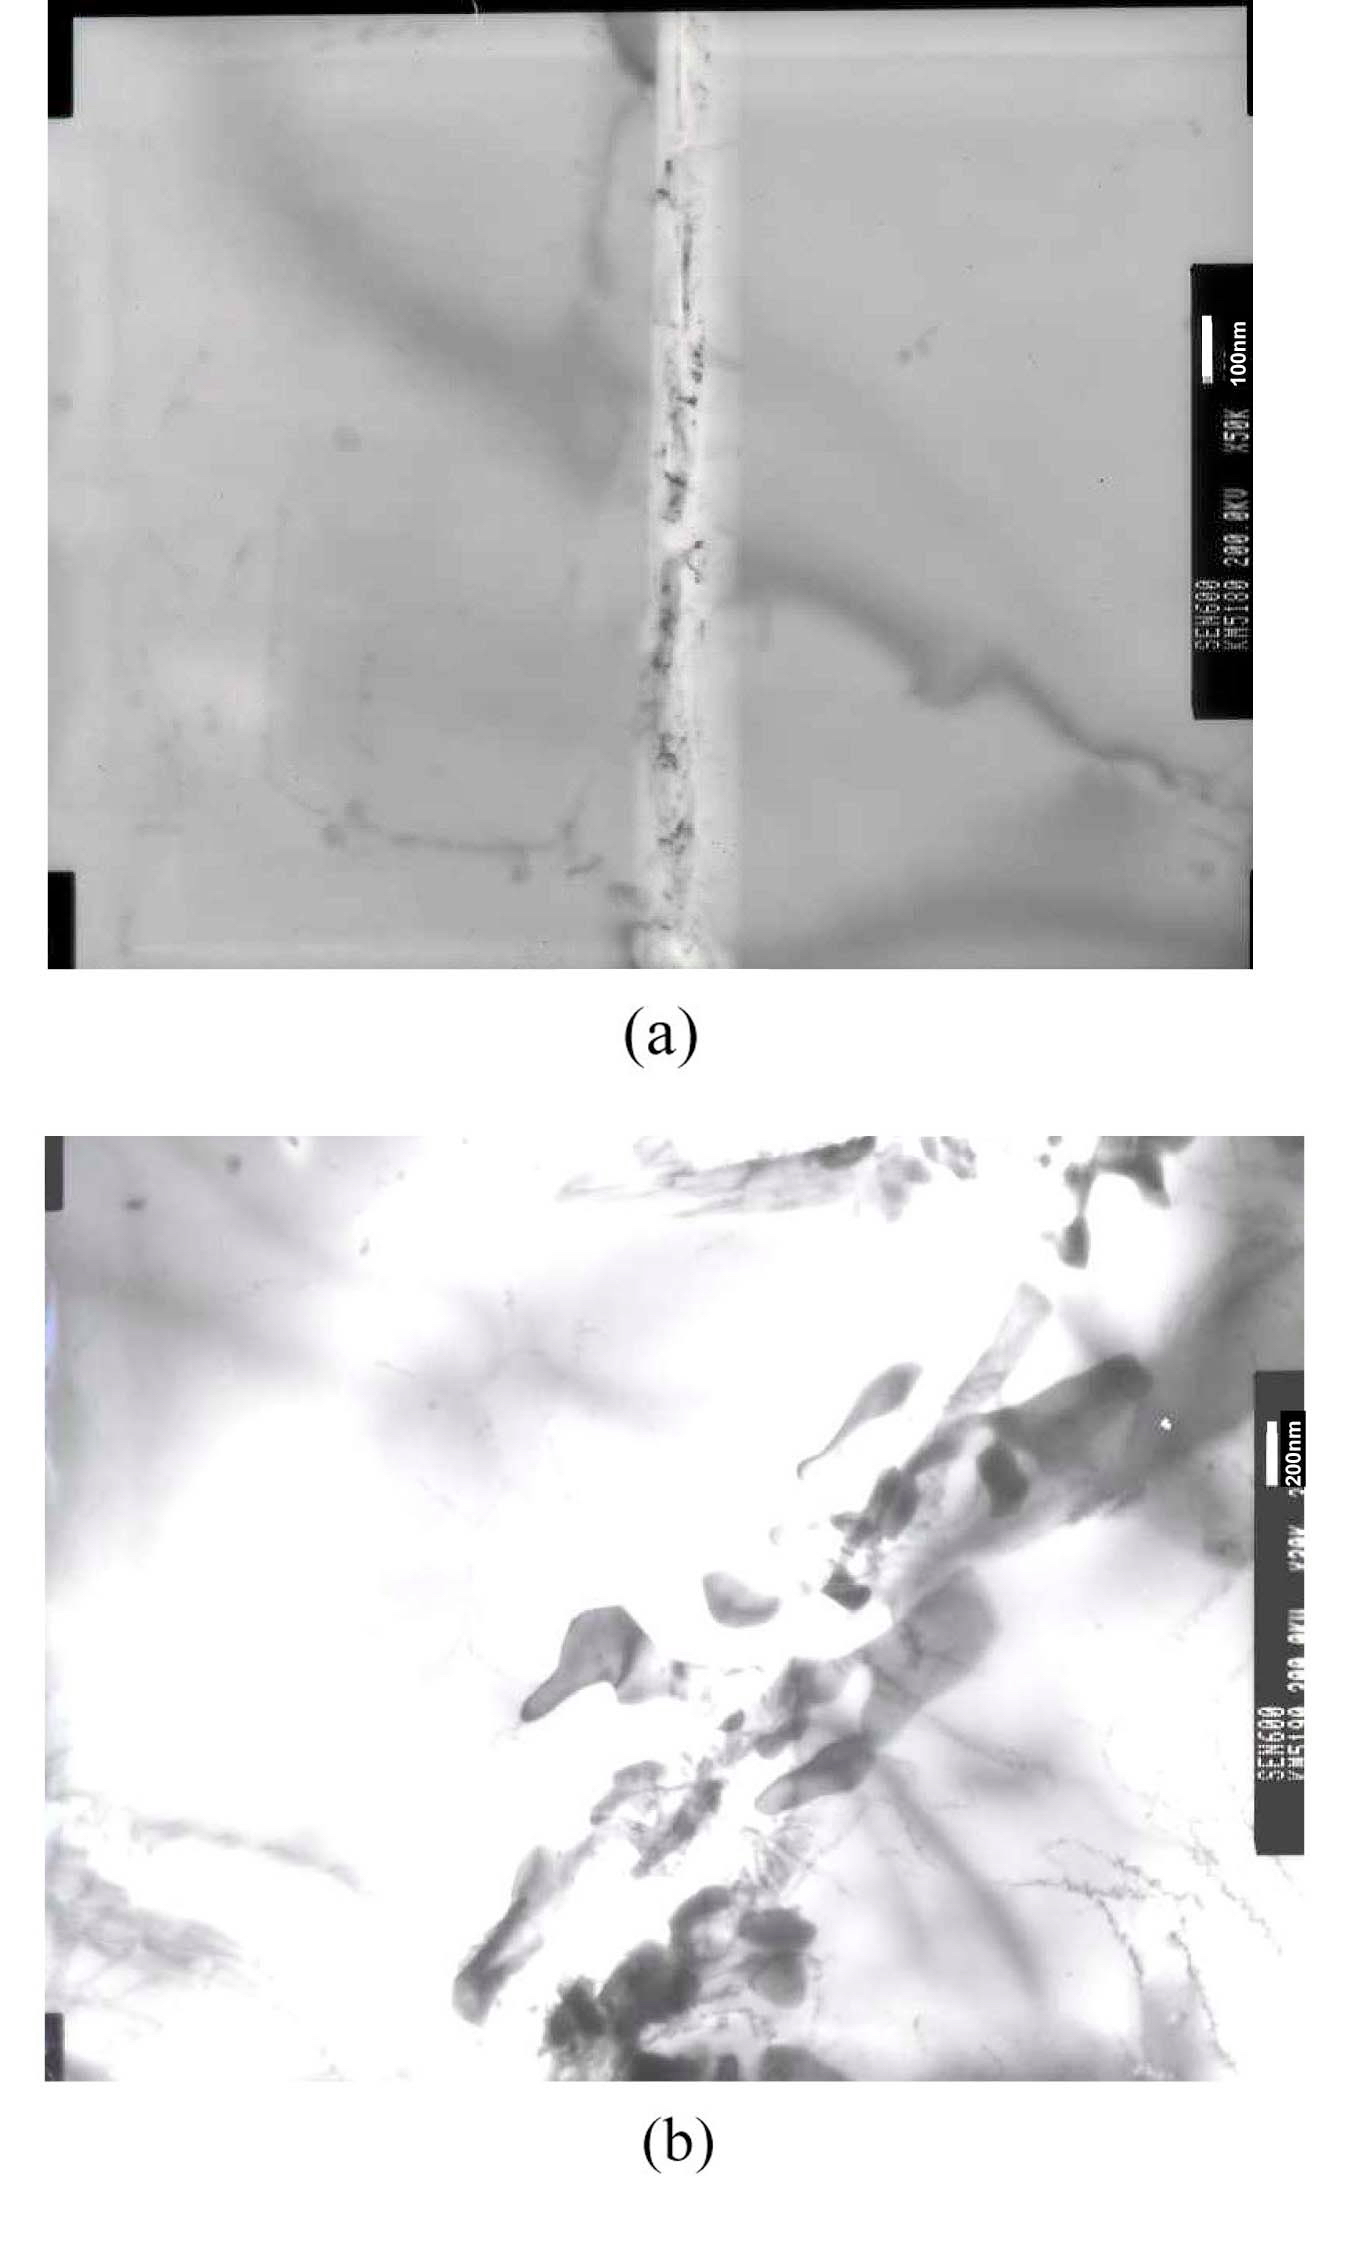 TEM Micrographs Showing Grain Boundary Carbides in a Sensitized Alloy 600 Tube.